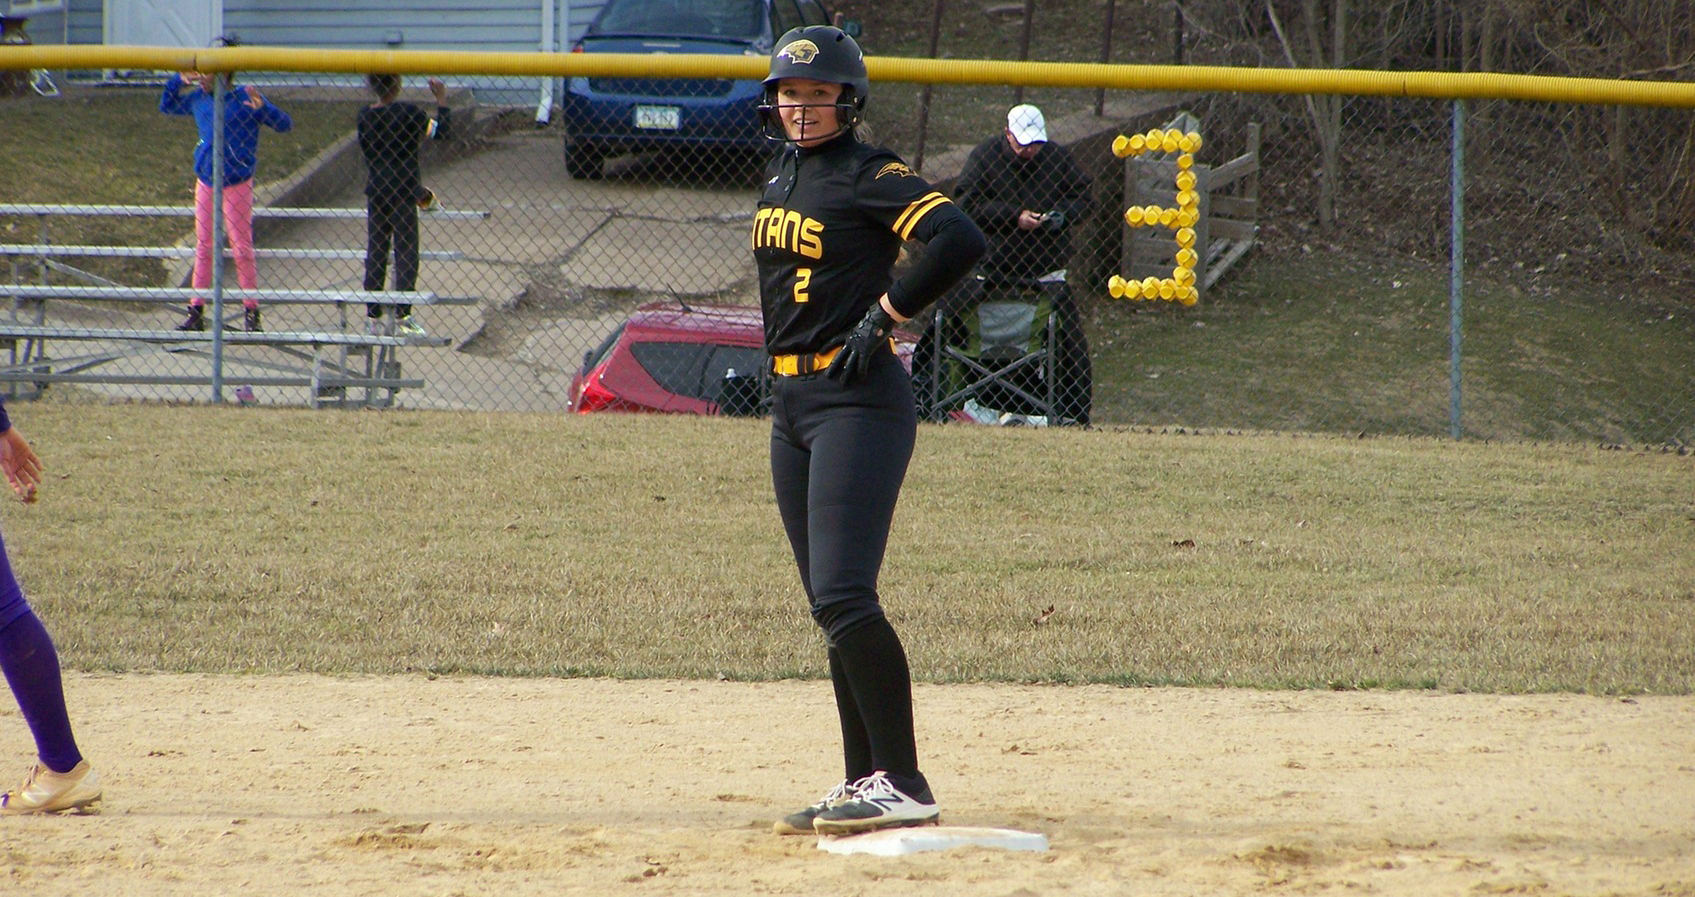 Abby Menting went 4-for-5 with a double during the Titans' win over Loras College in the nightcap.